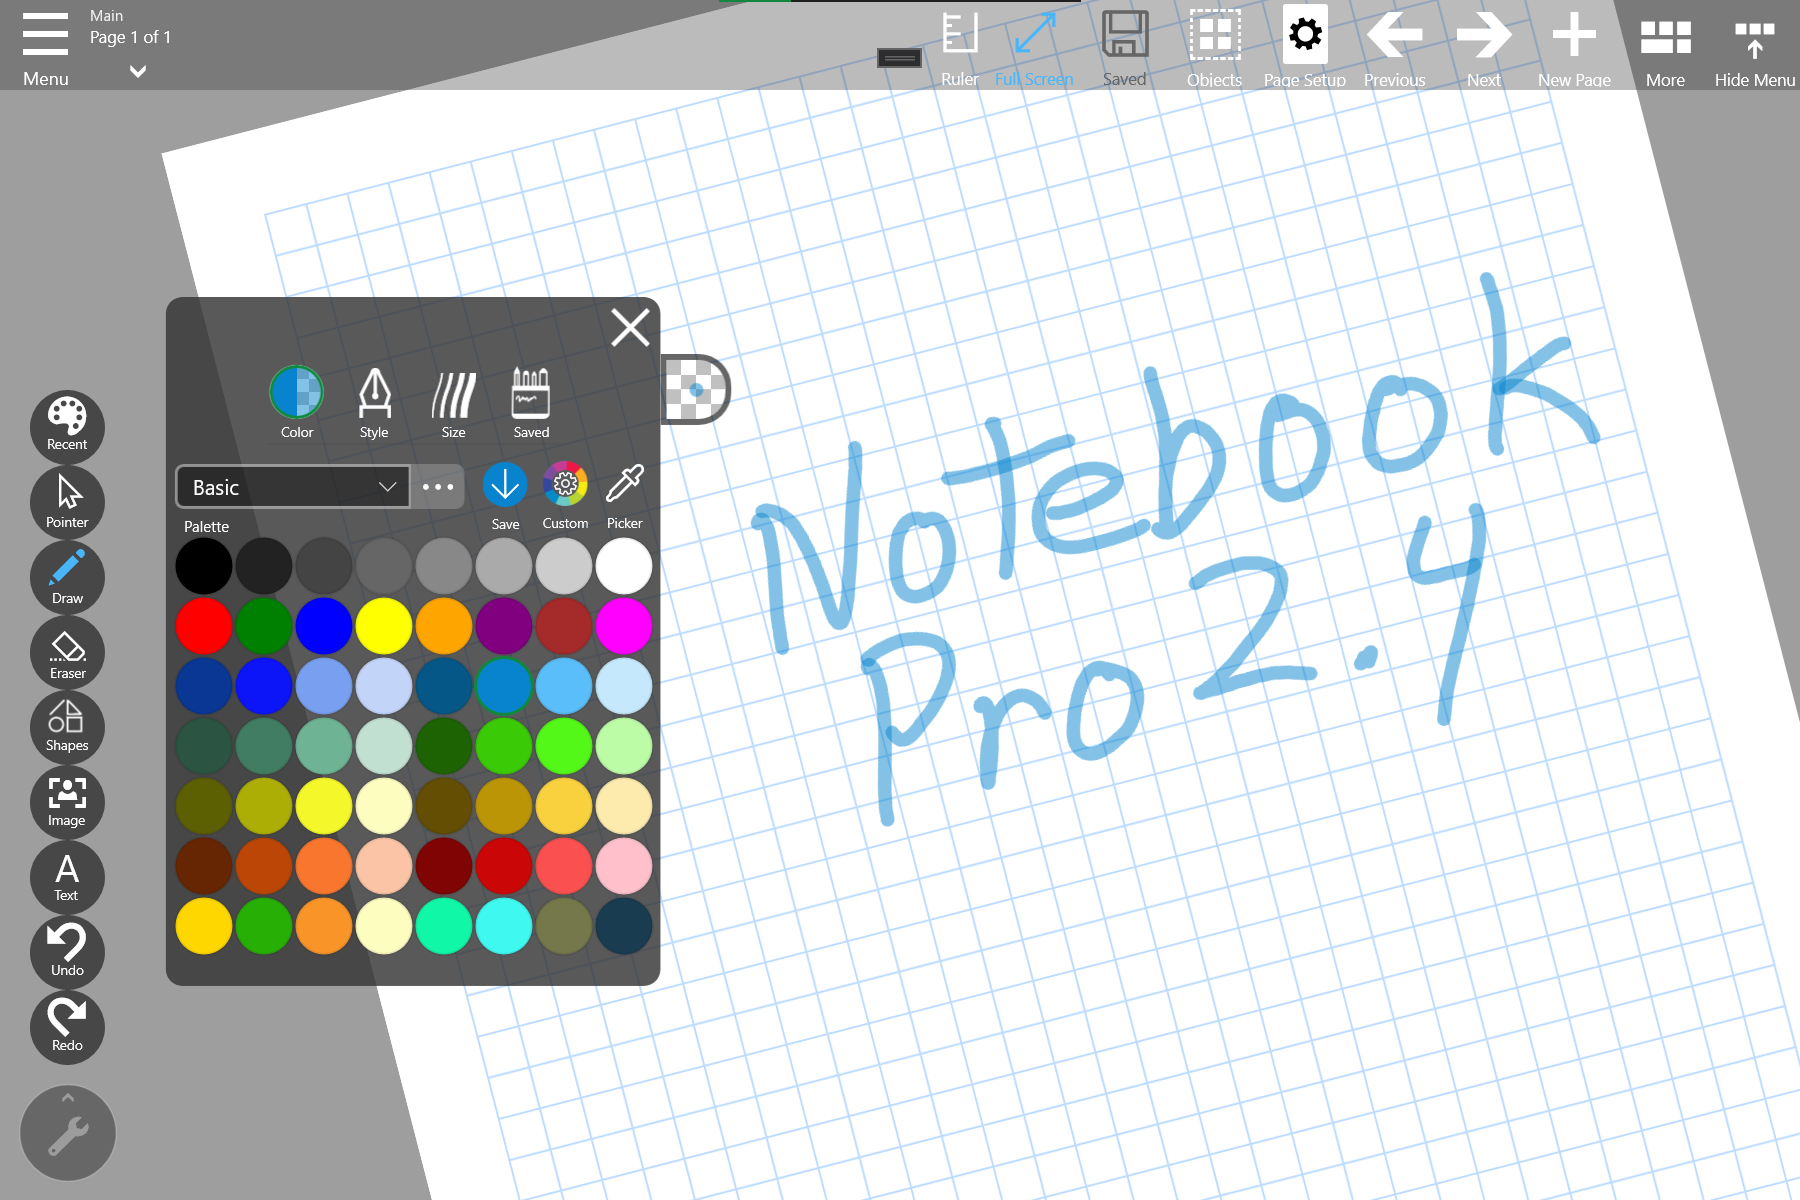 Notebook Pro 2.4 Released